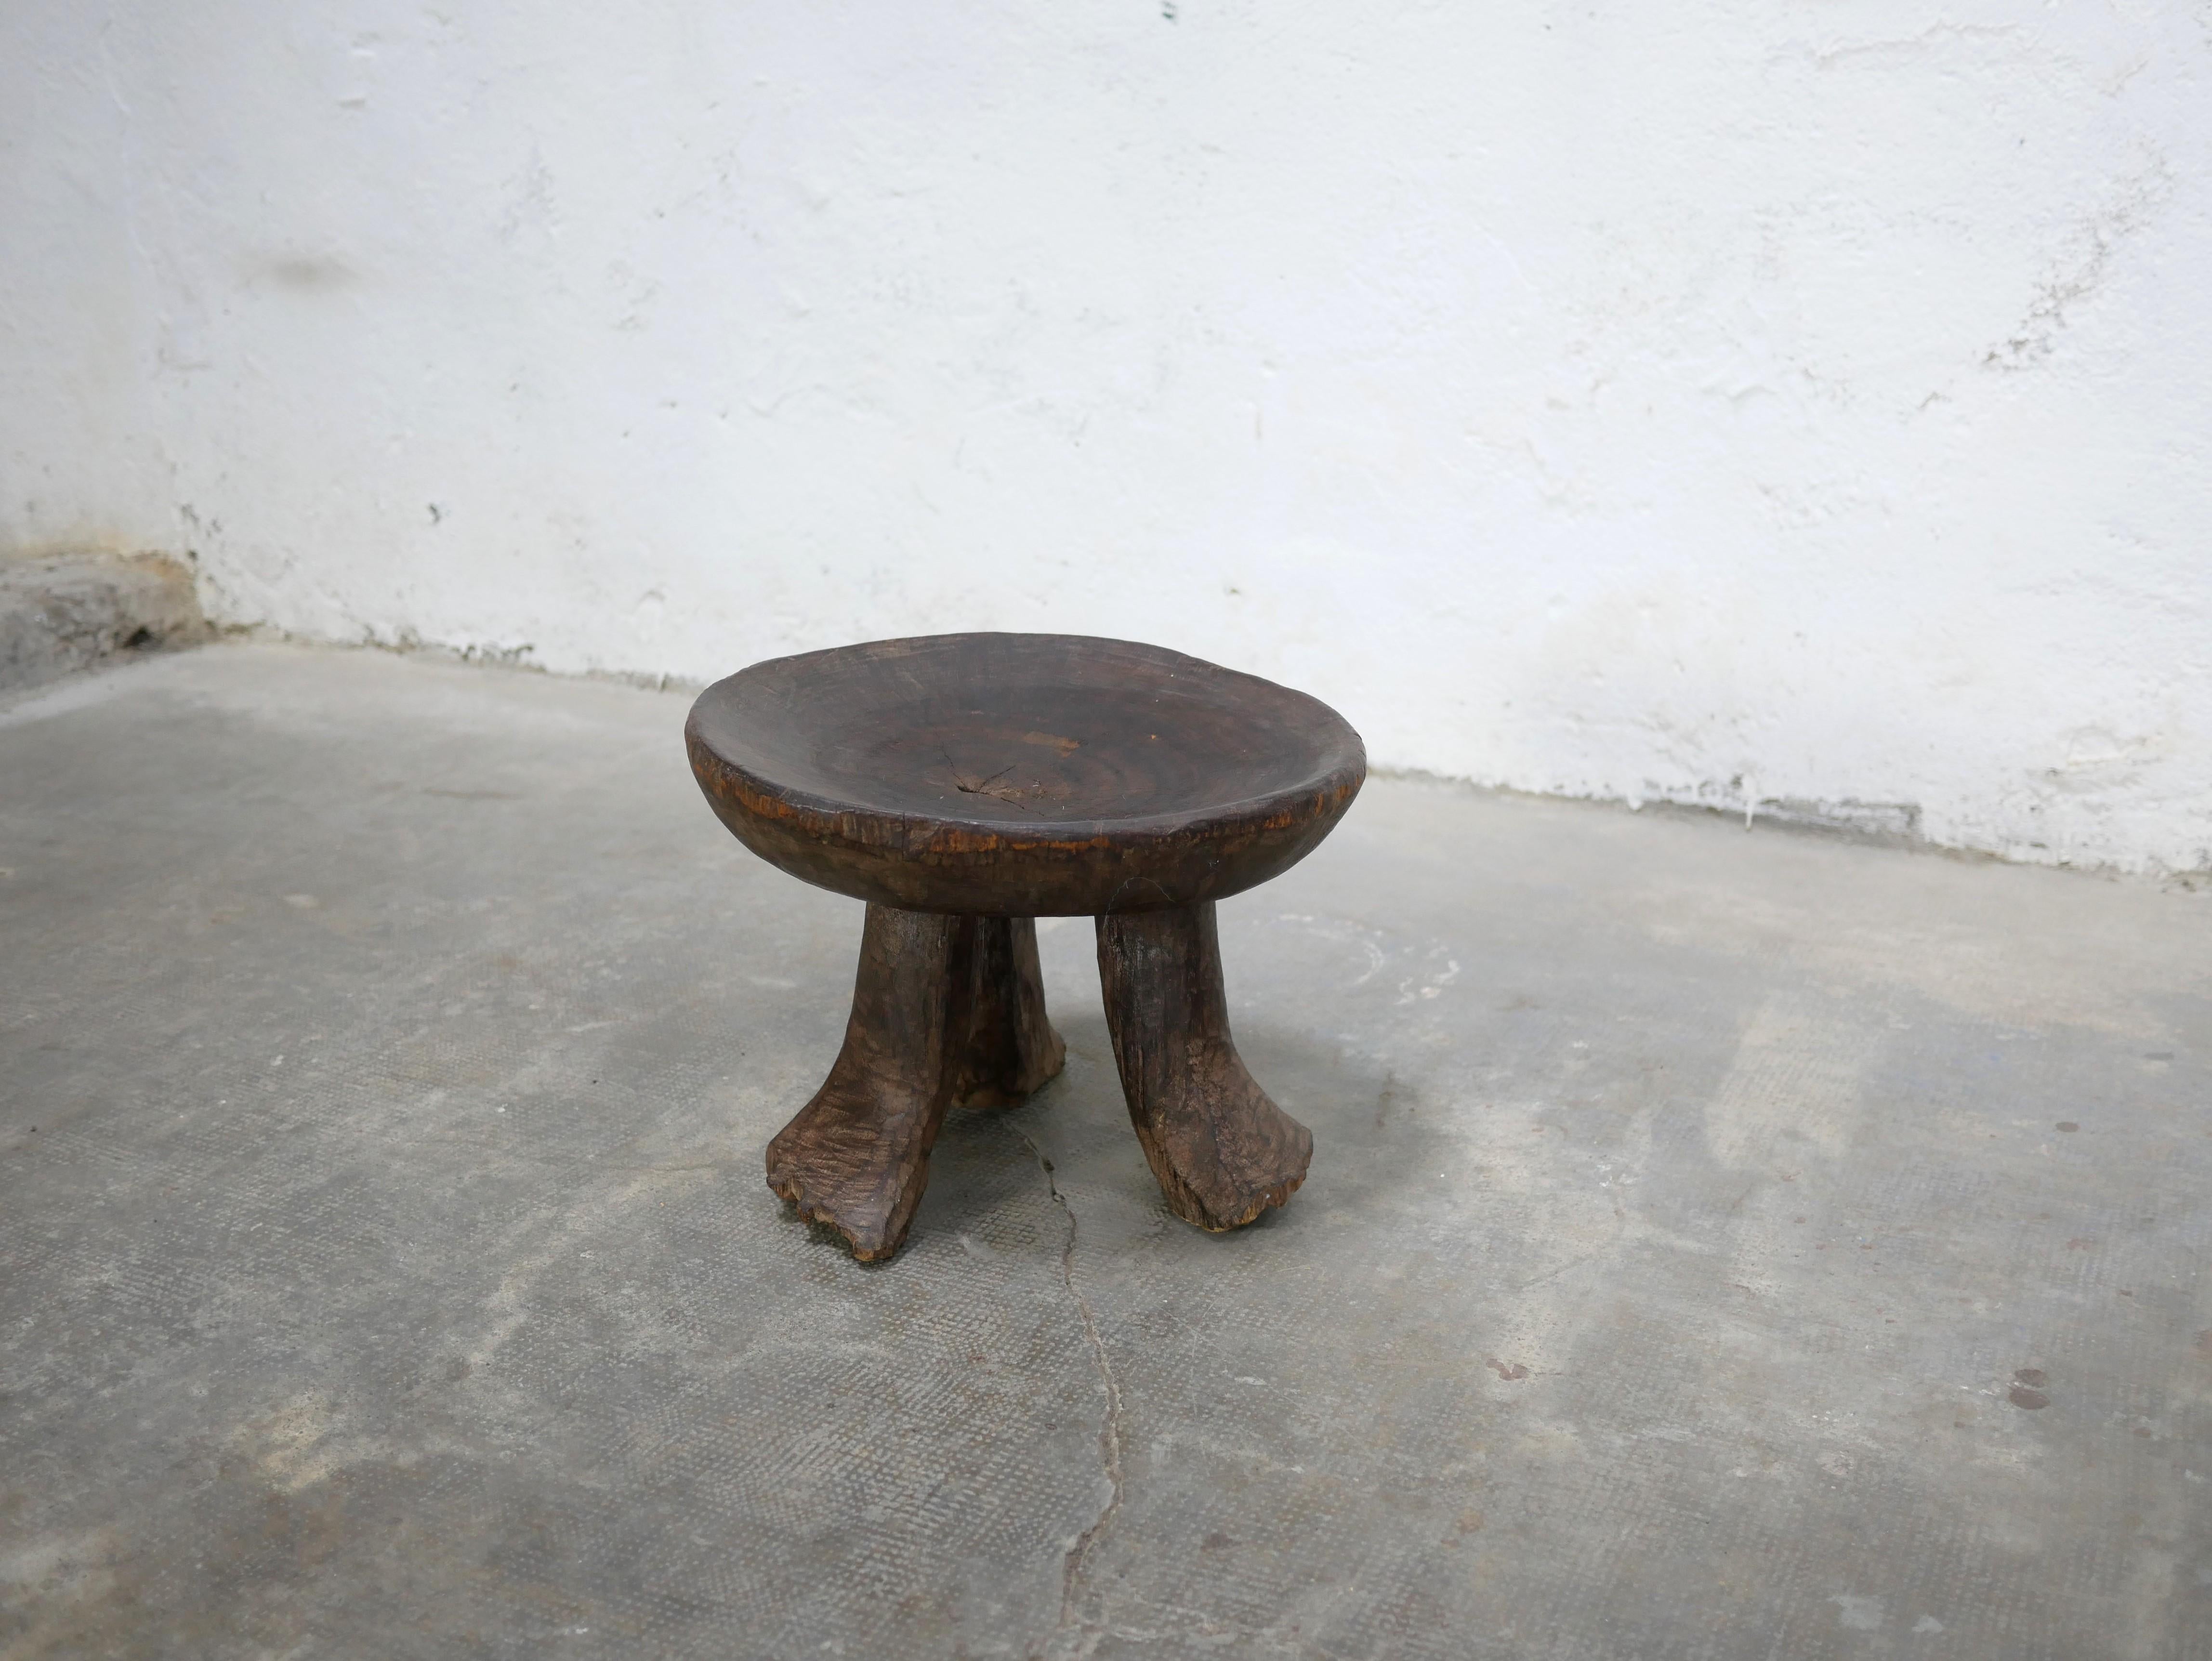 Ethiopian Old African wooden stool